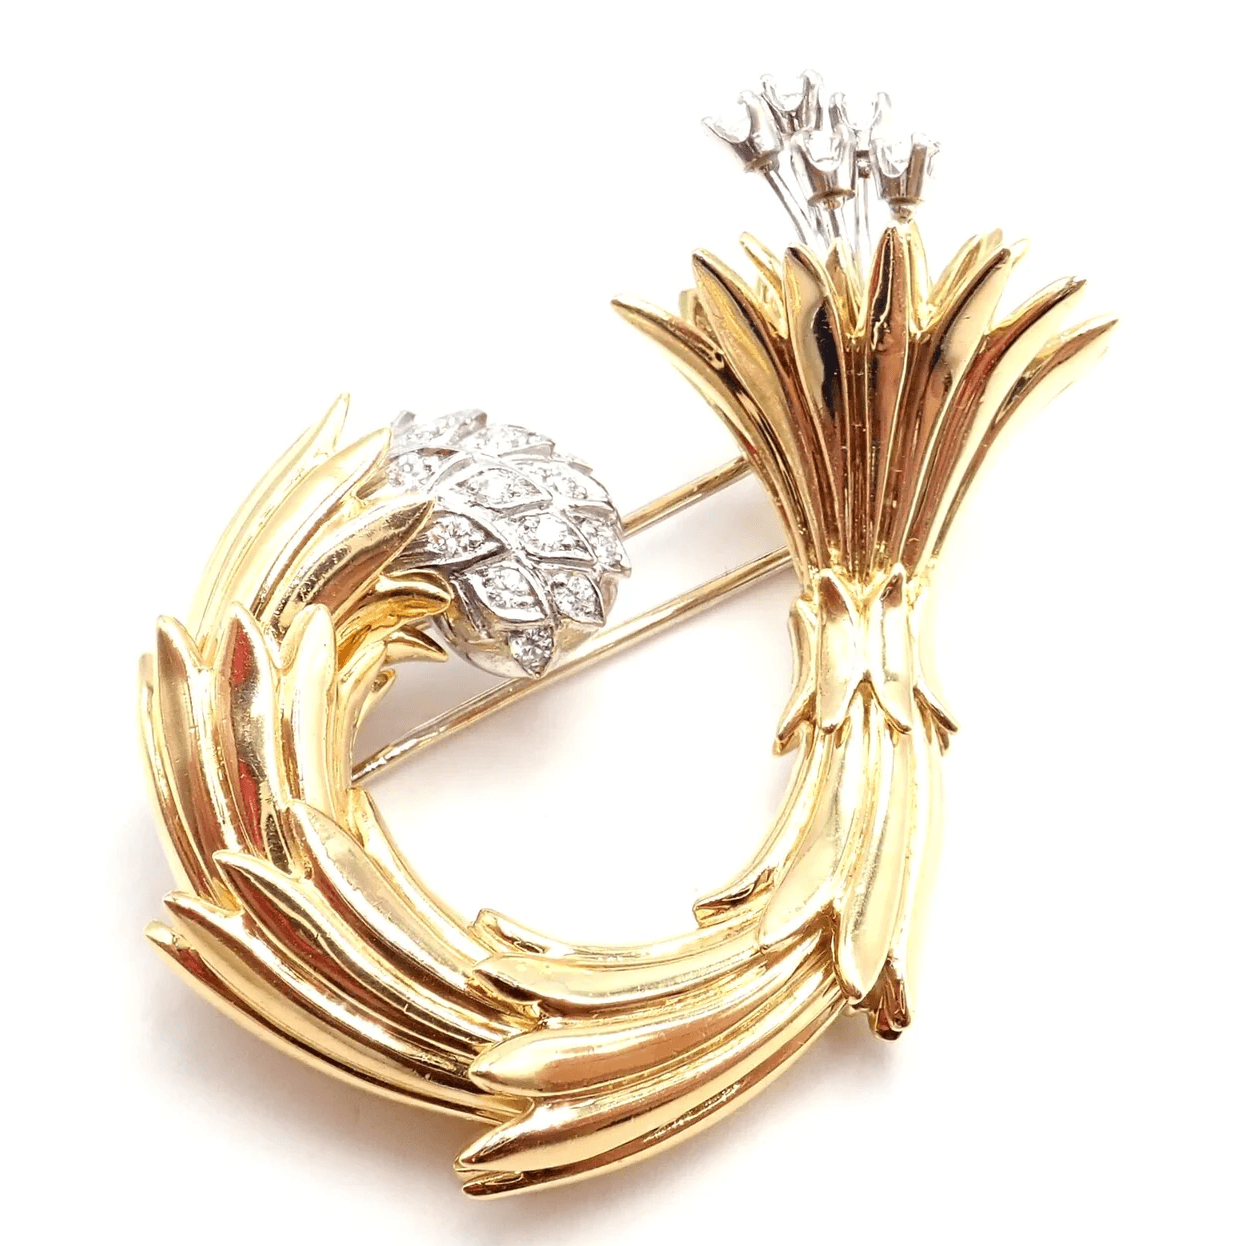 Jean Schlumberger Tiffany & Co. Post-1980s Platinum & 18KT Yellow Gold Diamond Brooch front